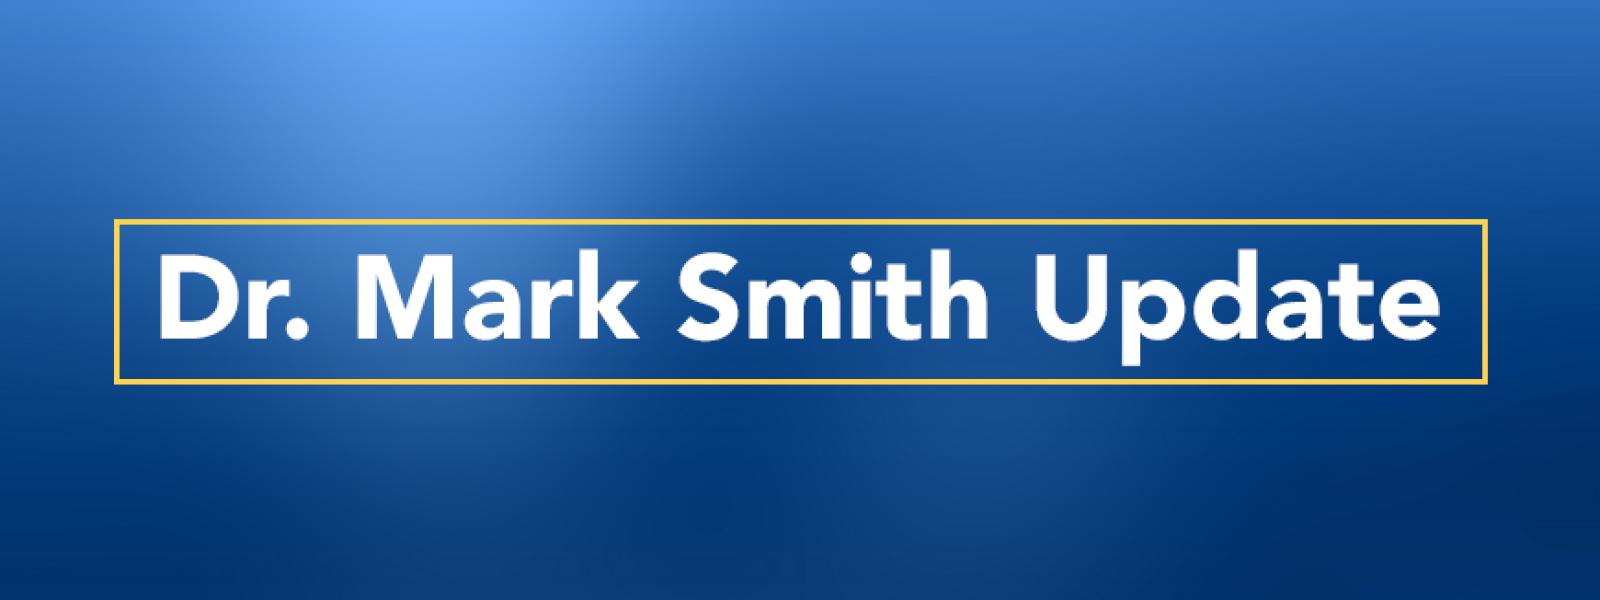 Dr. Mark Smith Update